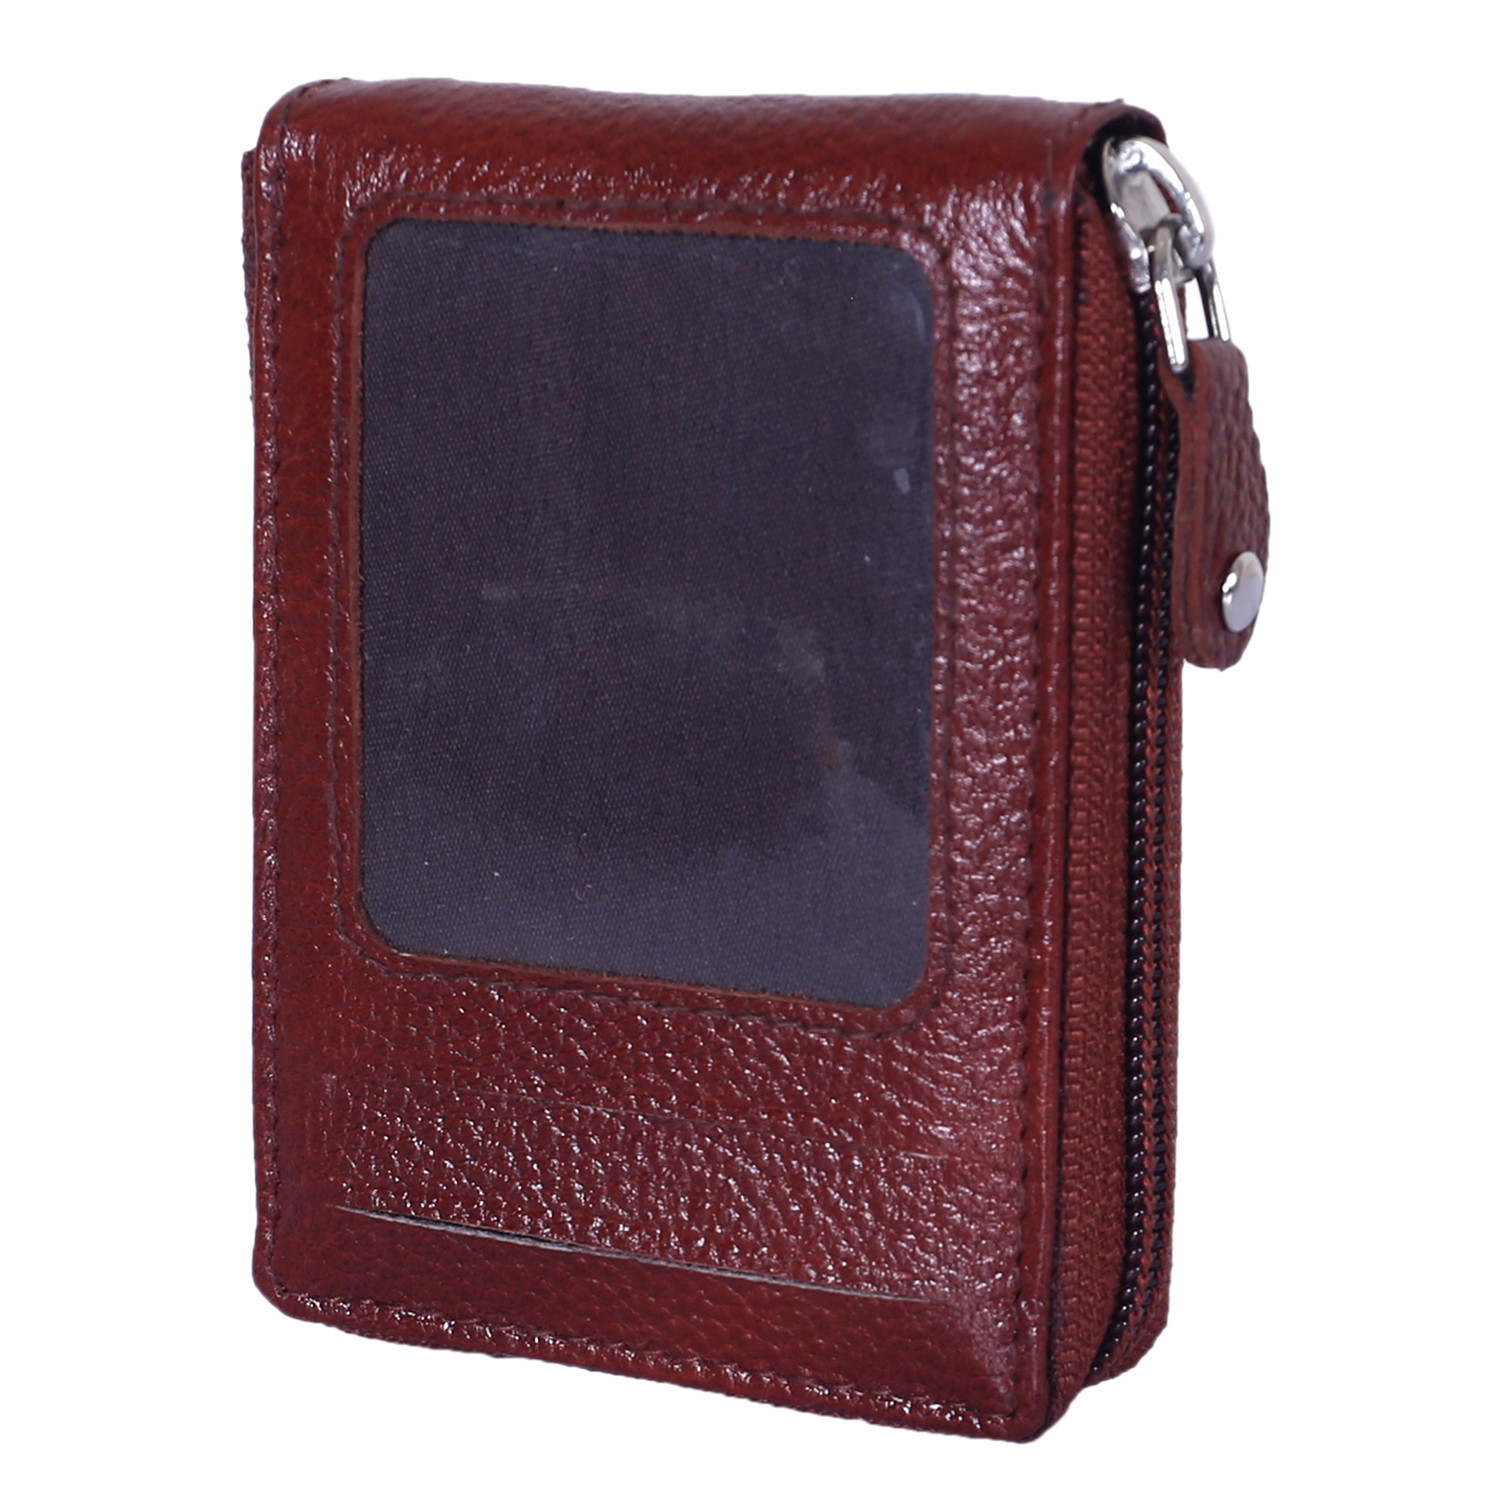 Kuber Industries Soft Leather Card Holder | Zipper Wallet For Man & Woman With 11 Slot (Brown)